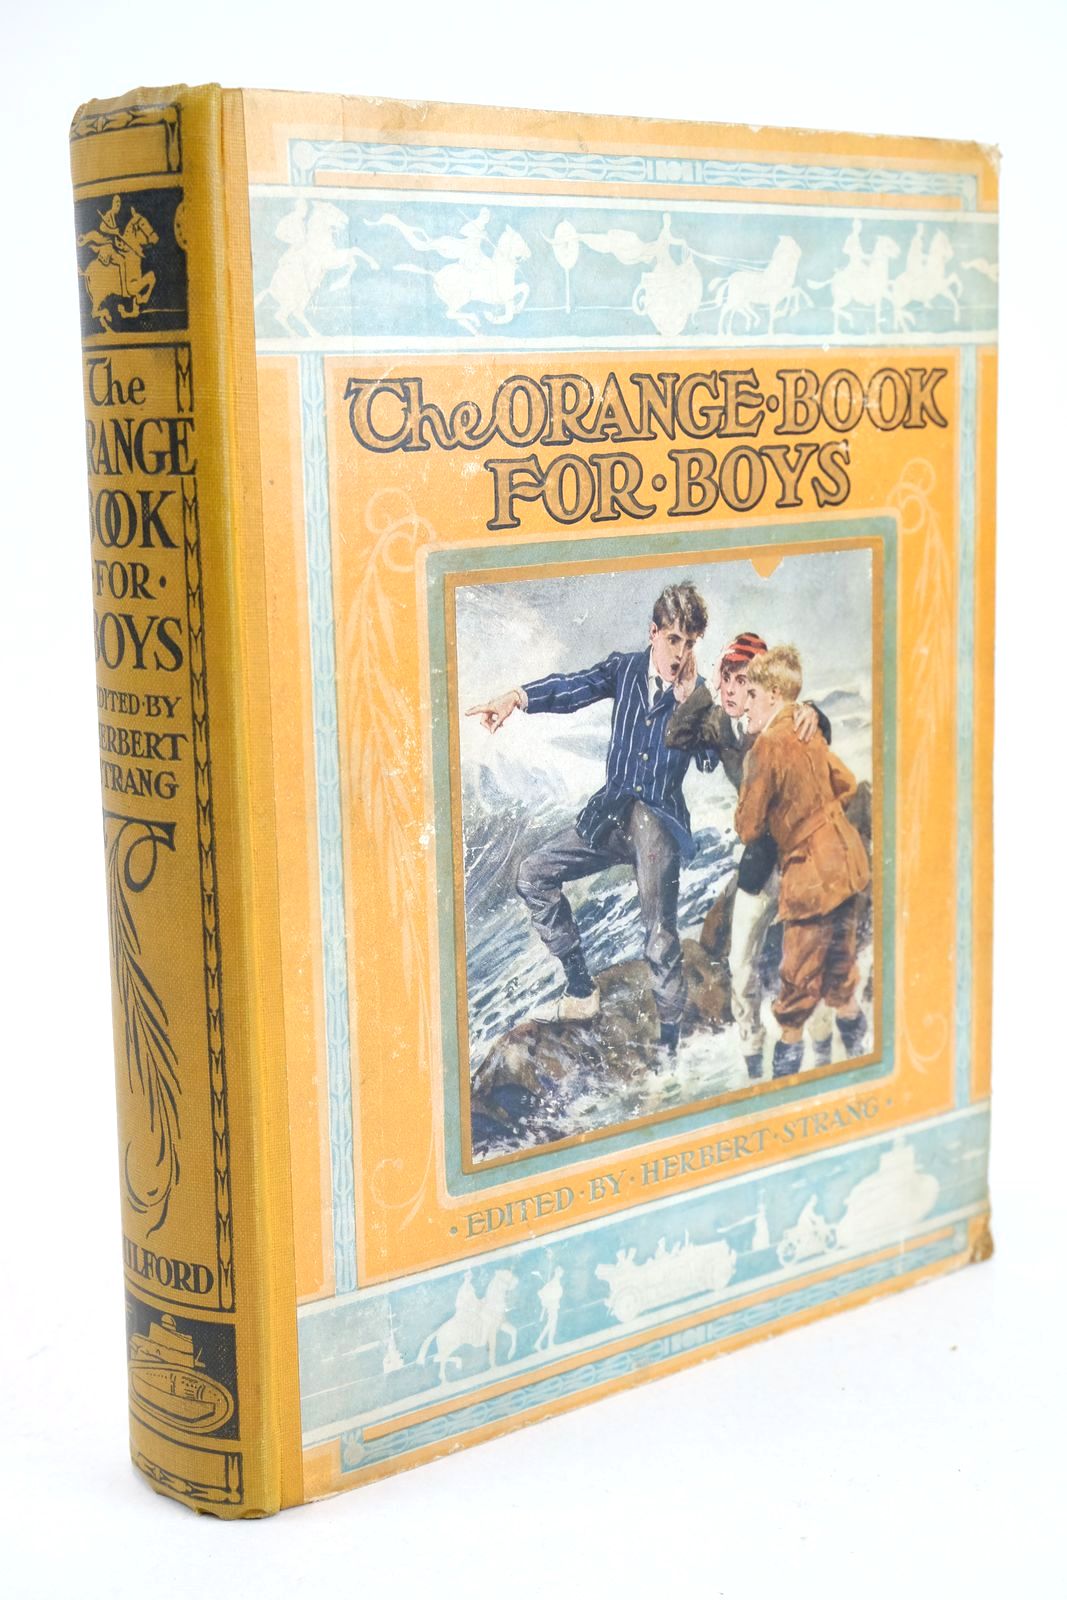 Photo of THE ORANGE BOOK FOR BOYS written by Strang, Herbert Gilson, Captain Charles Byron, May et al,  illustrated by Brock, C.E. Ford, H.J. Cuneo, Cyrus et al.,  published by Humphrey Milford, Oxford University Press (STOCK CODE: 1325524)  for sale by Stella & Rose's Books